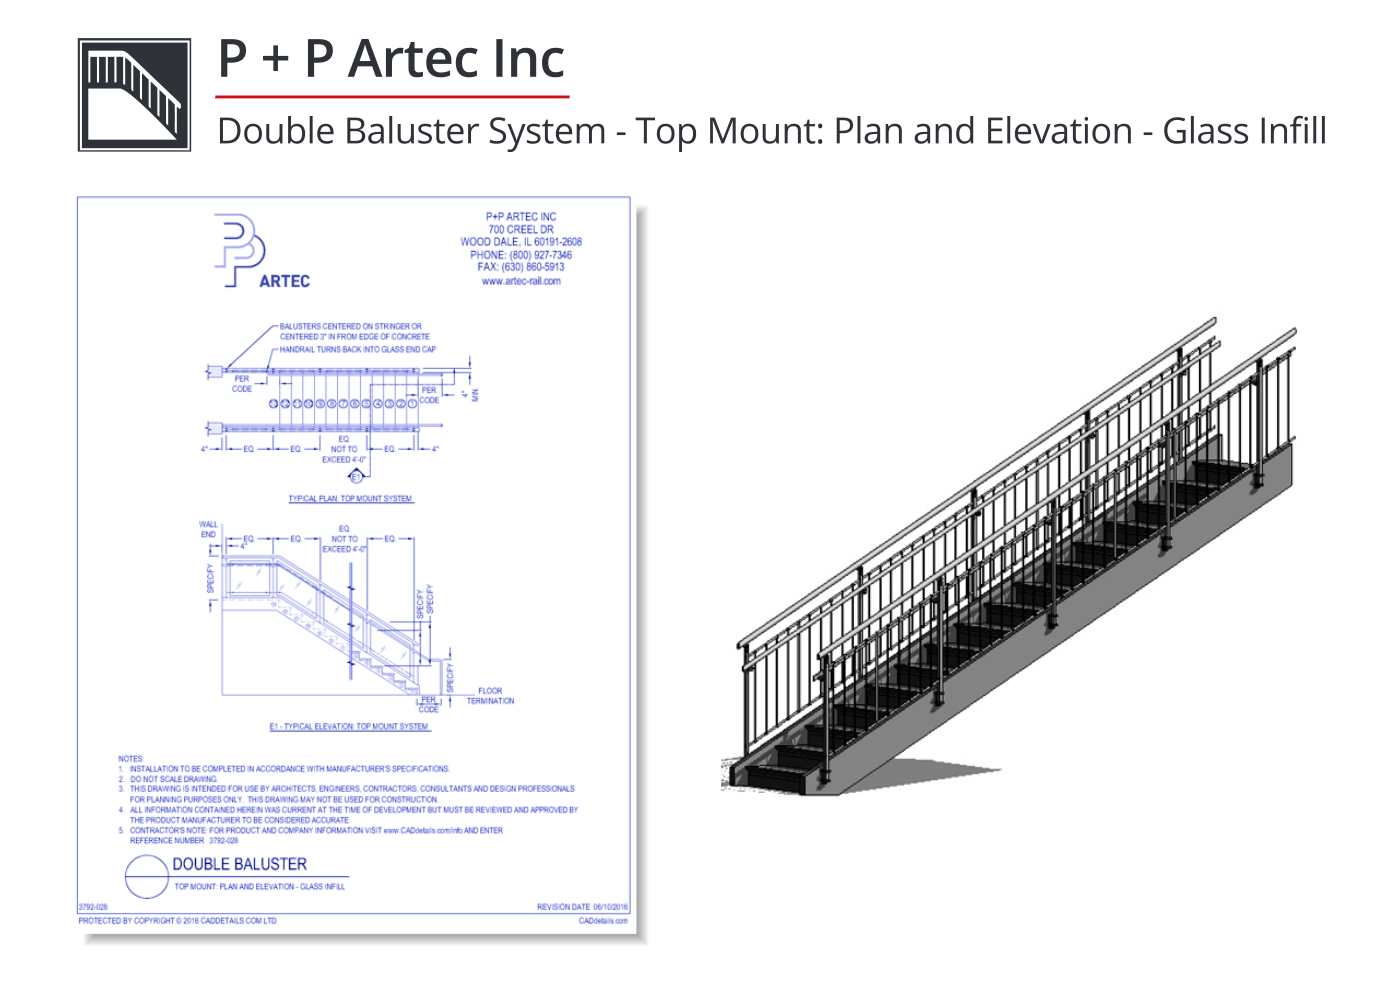 15 Cad Drawings Of Railings For Your Residential Or Commercial Projects Design Ideas For The Built World